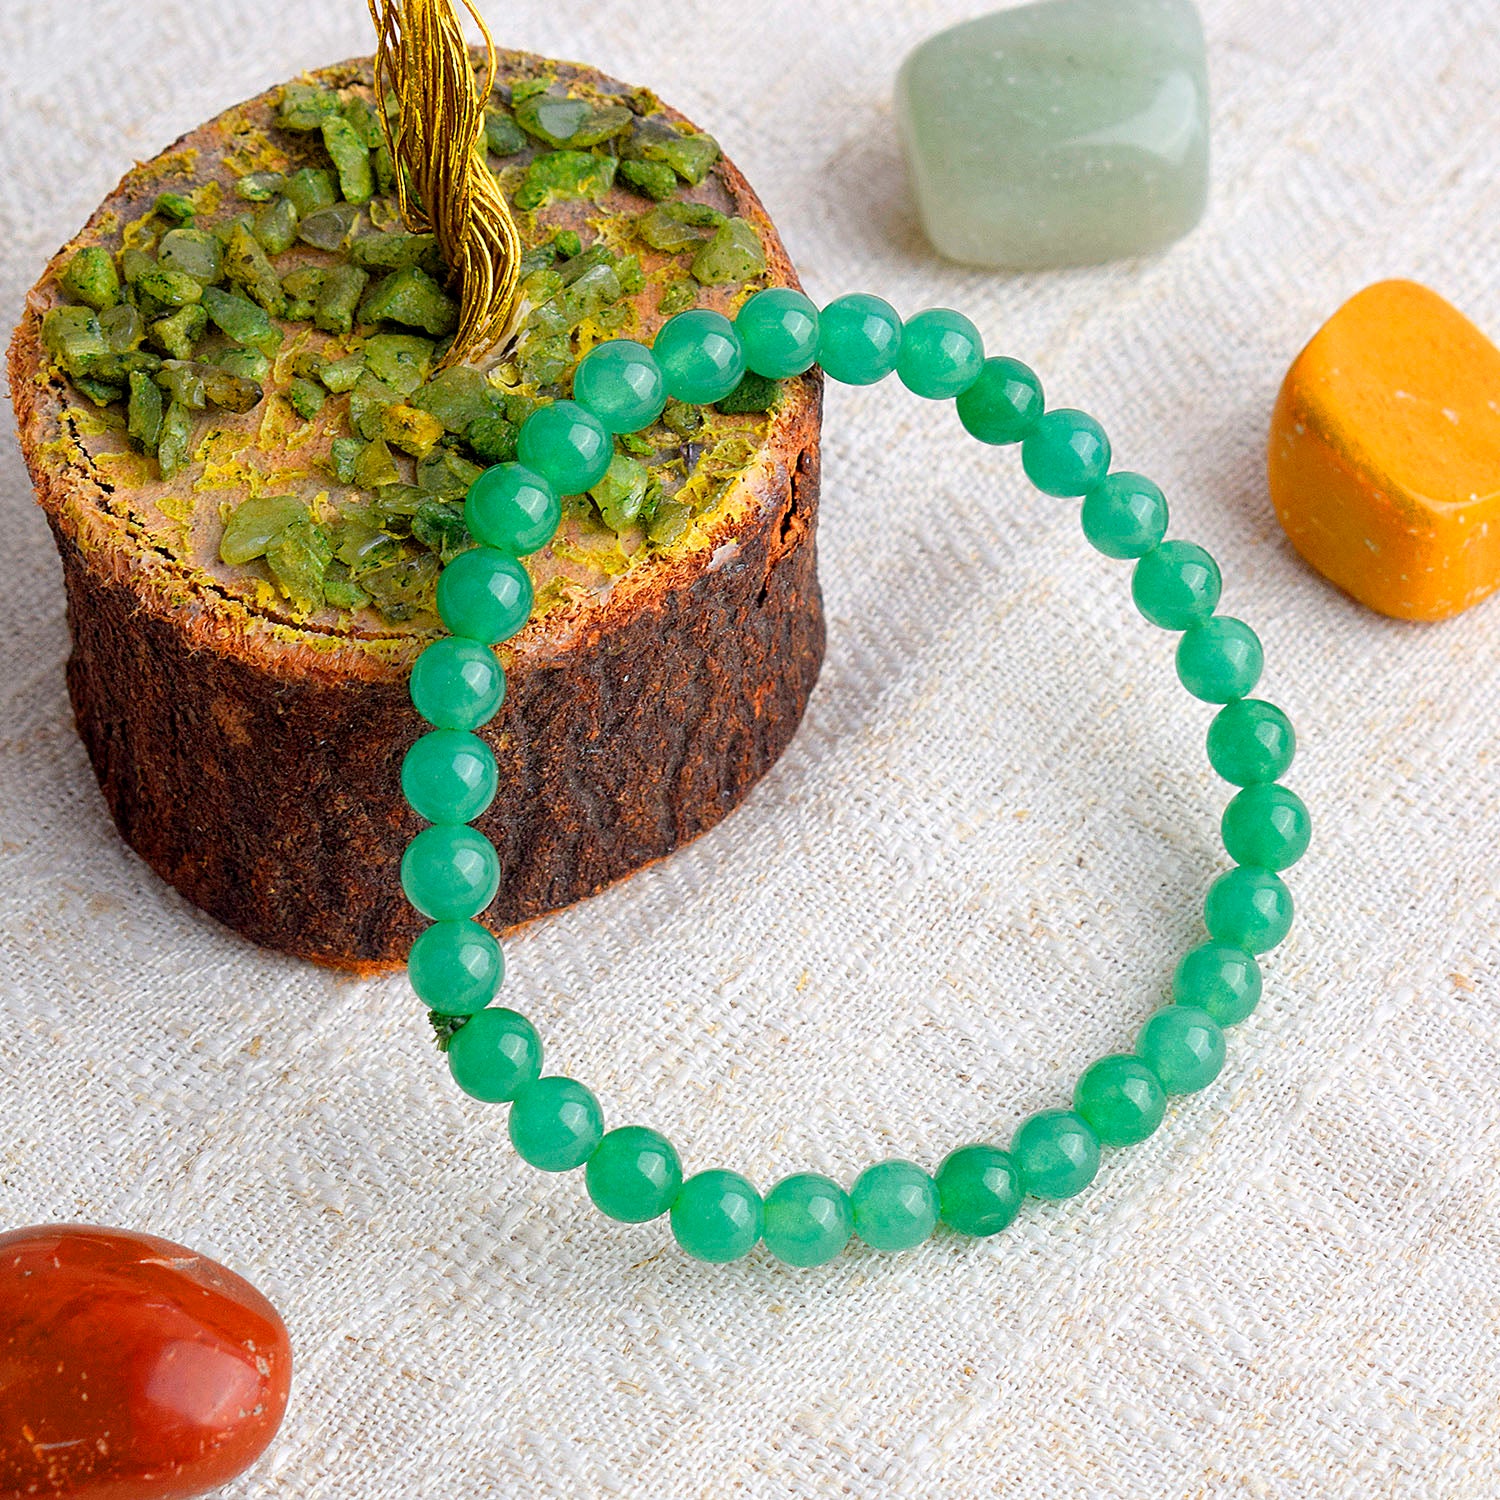 Green Aventurine Crystal Meaning | Conscious Items